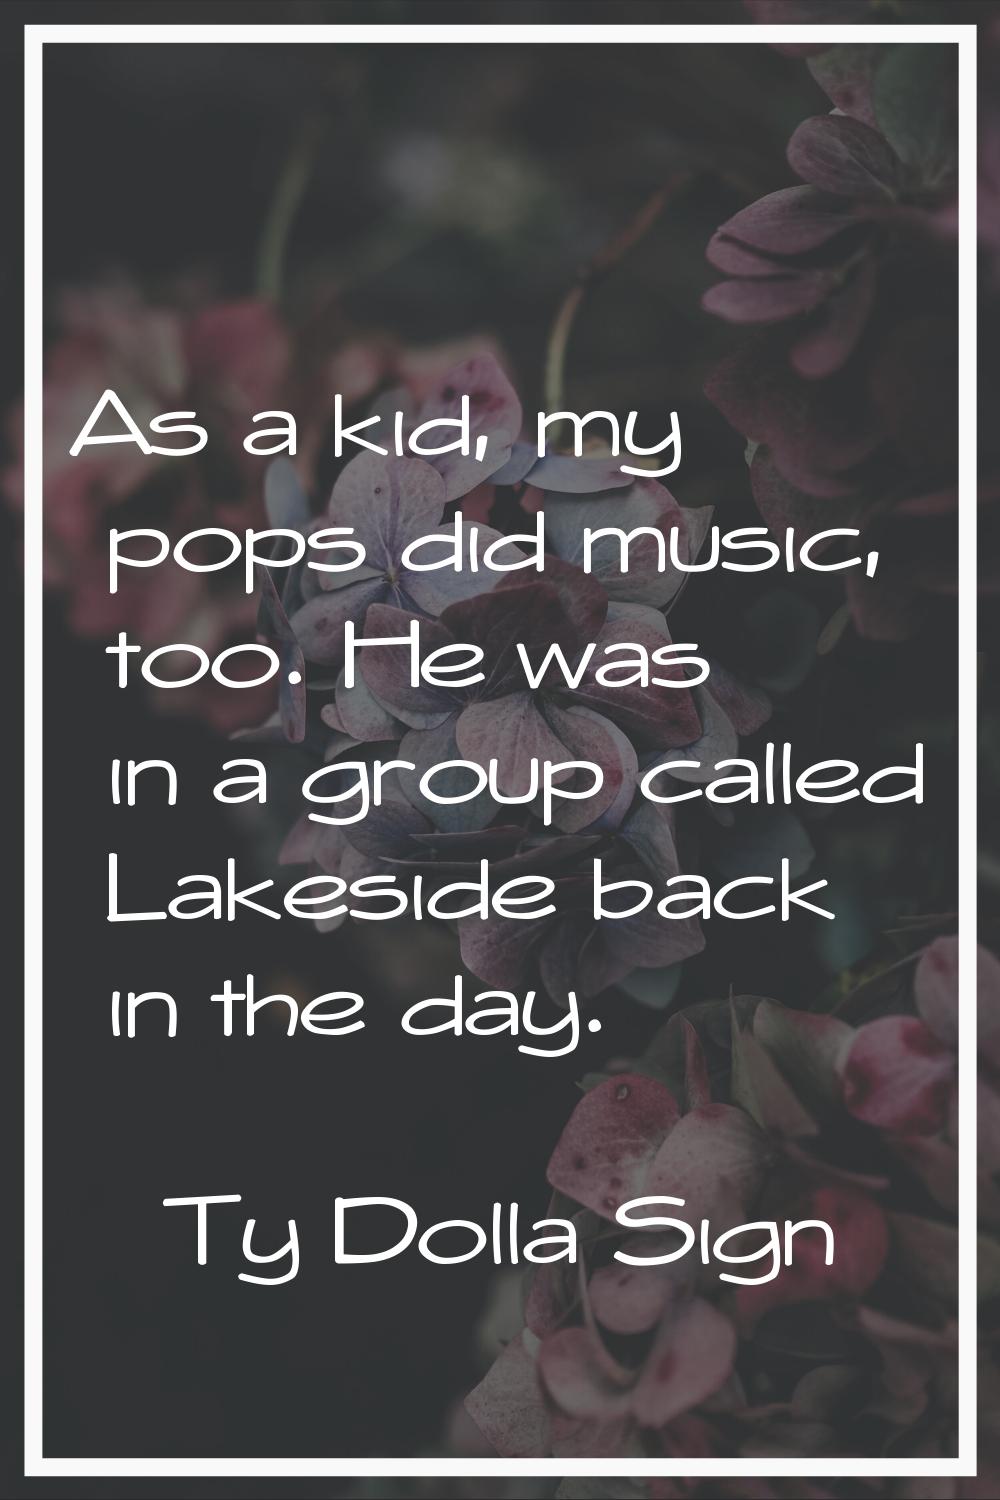 As a kid, my pops did music, too. He was in a group called Lakeside back in the day.